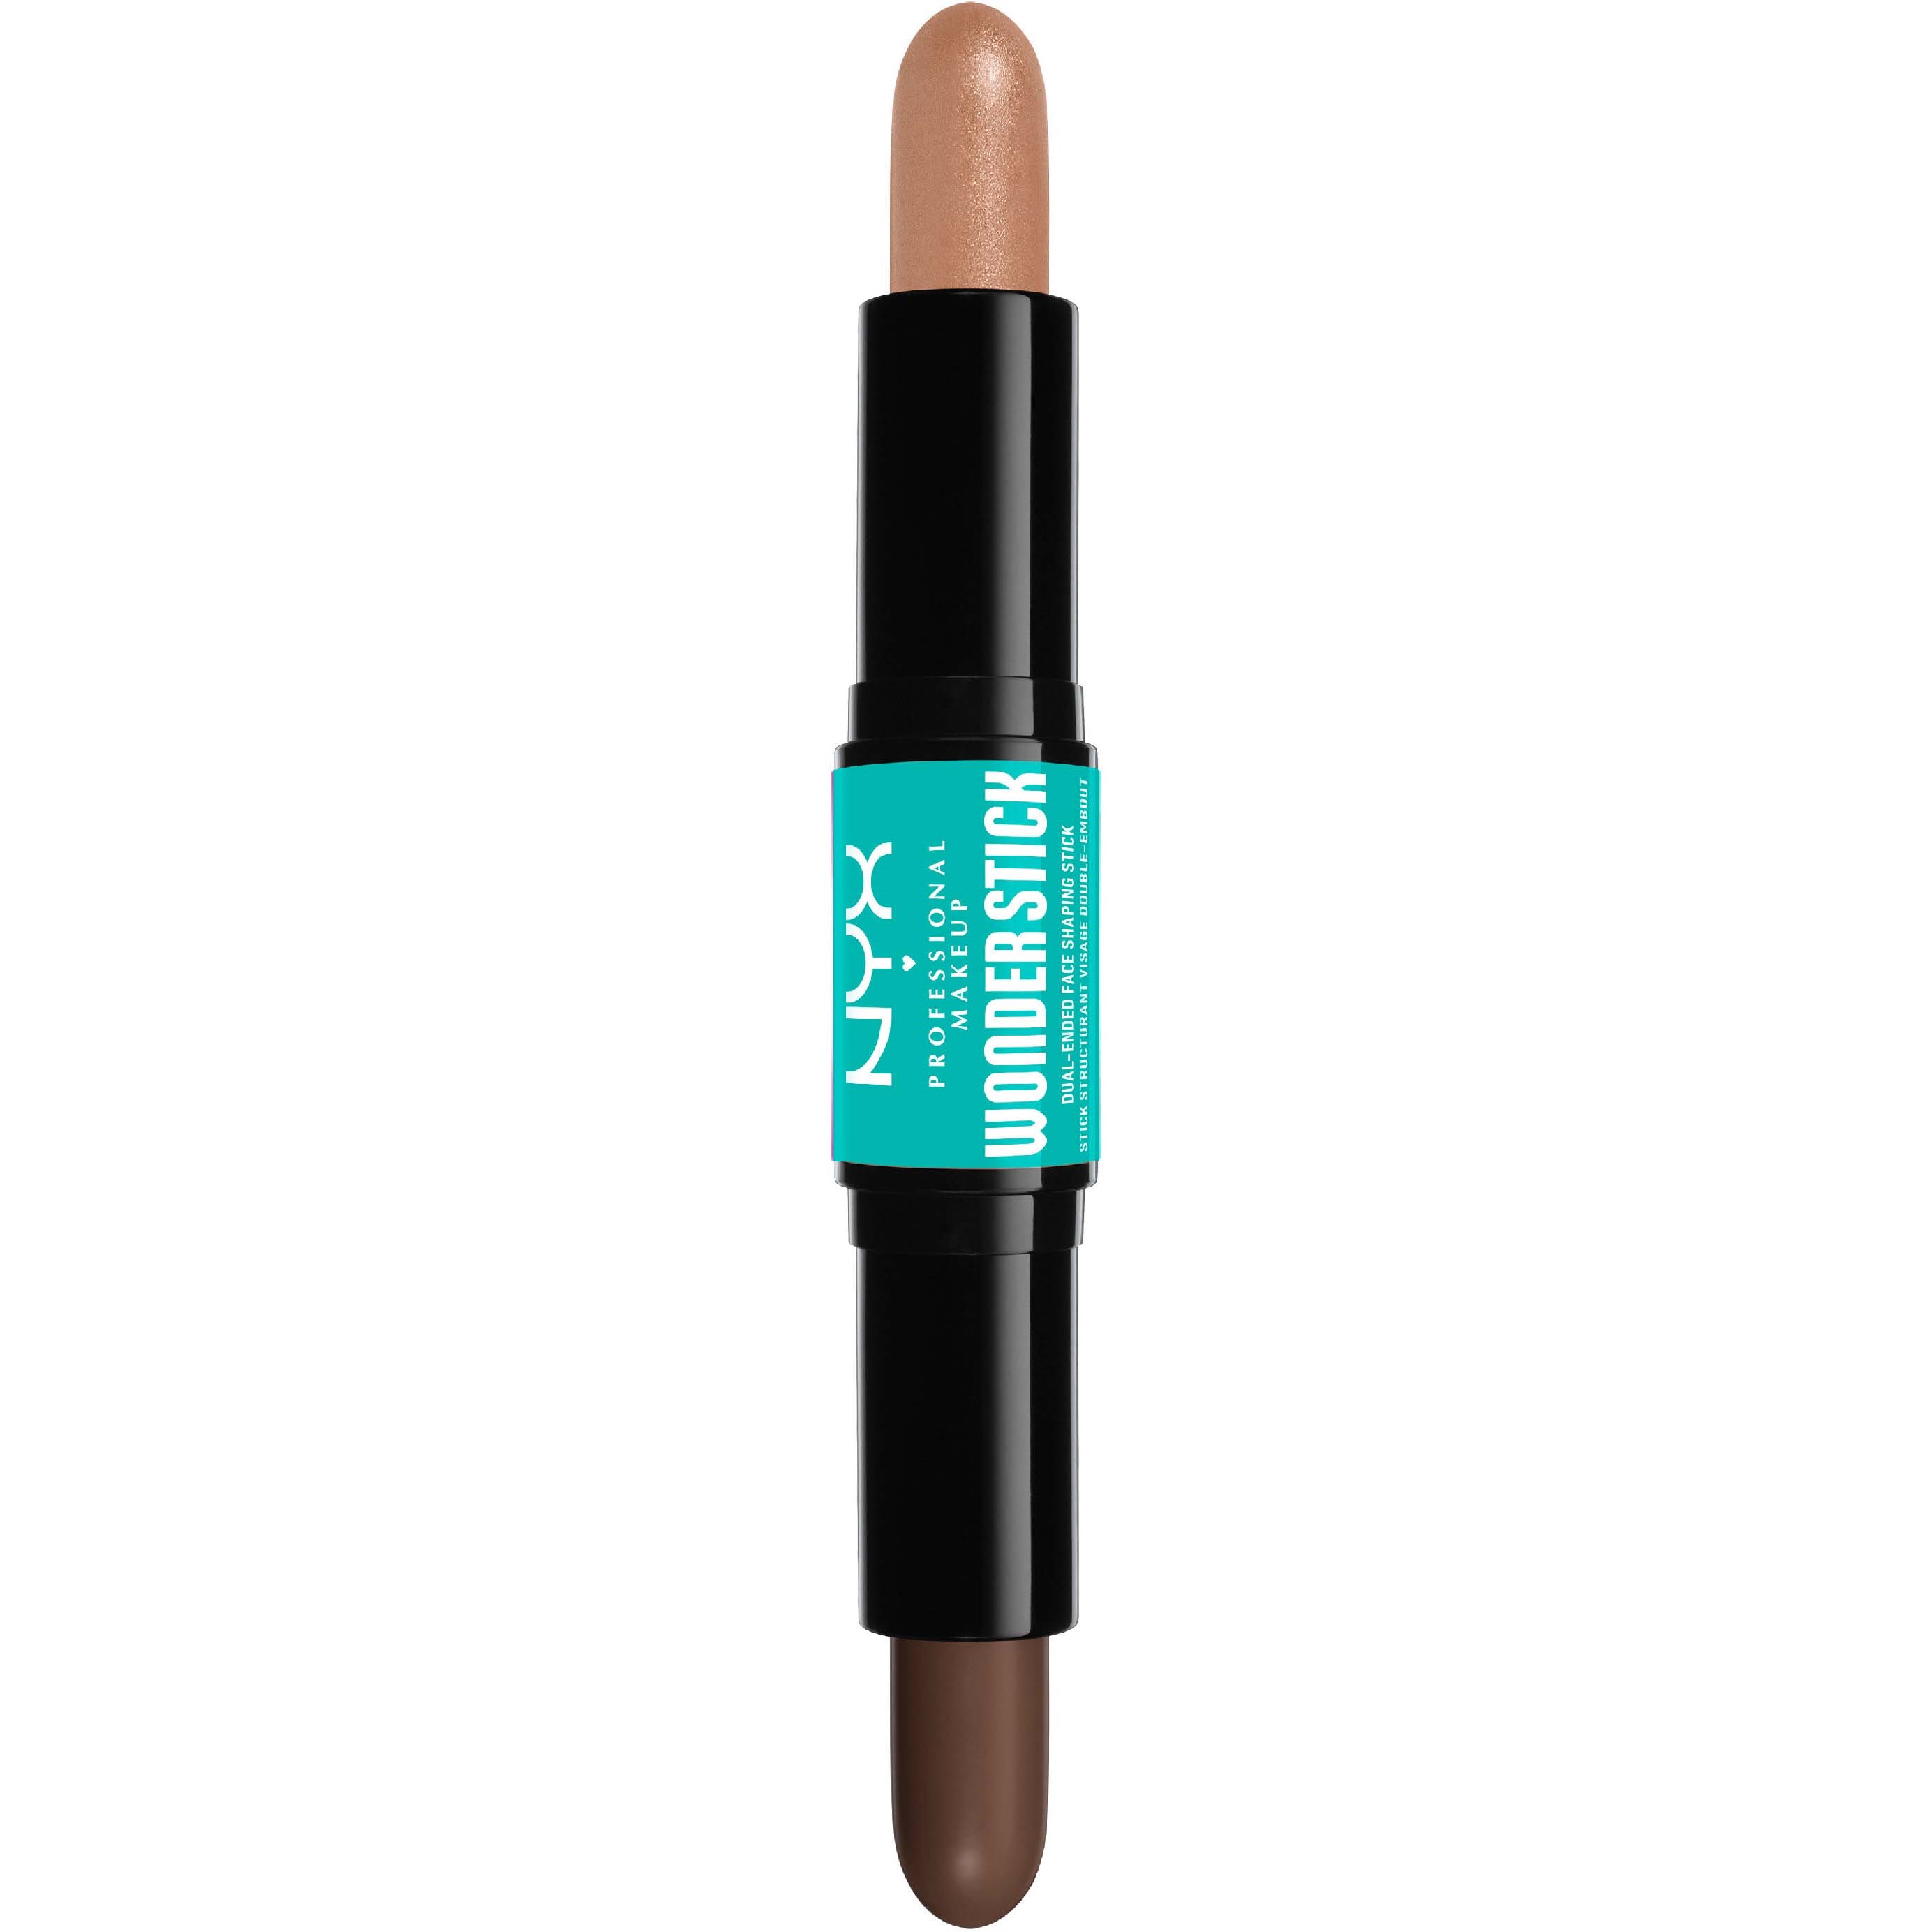 Läs mer om NYX PROFESSIONAL MAKEUP Wonder Stick Dual-Ended Face Shaping Stick 06